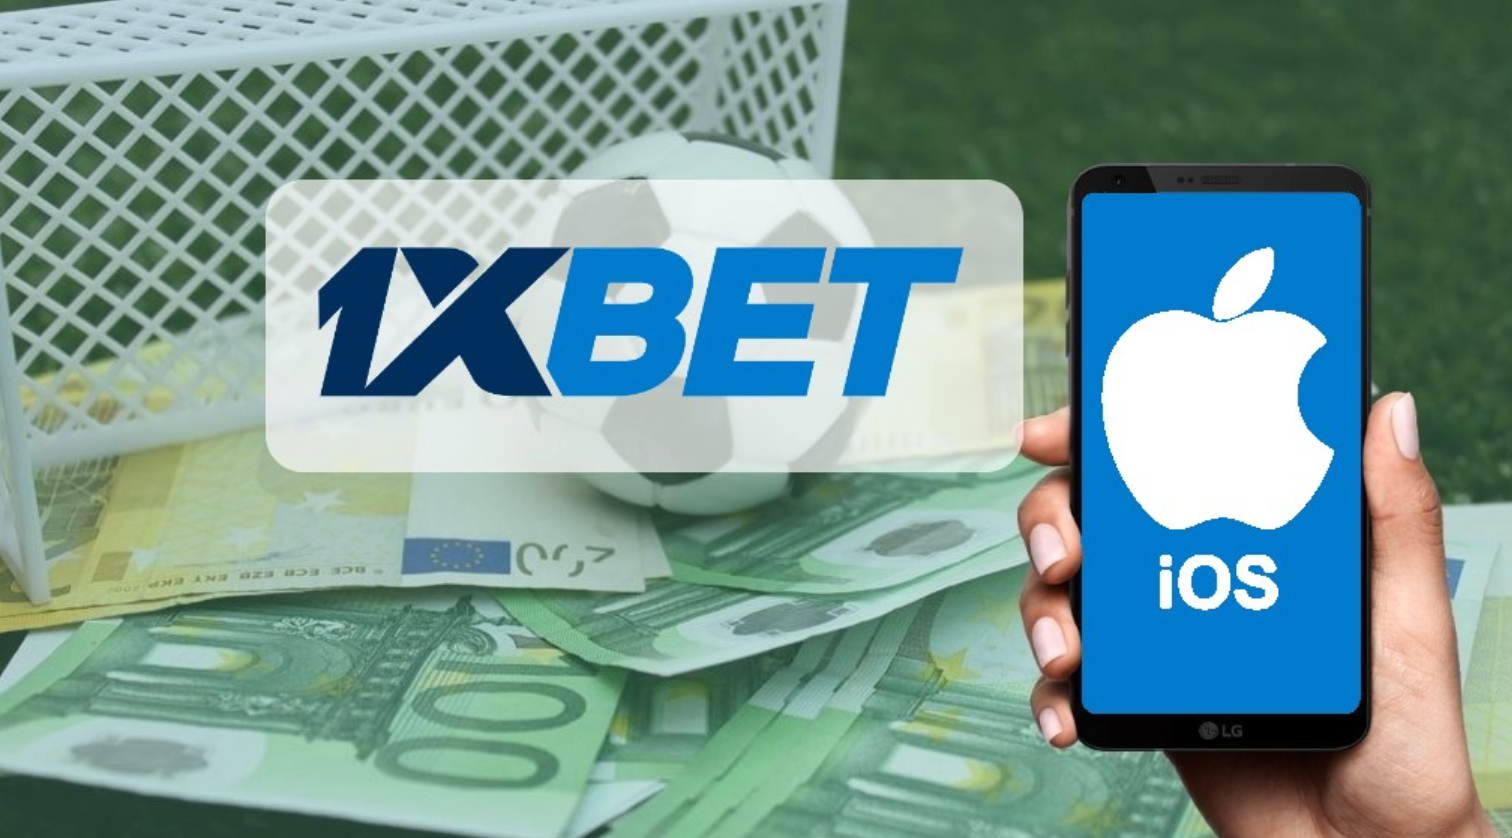 1xBet app on iOS from Cameroon